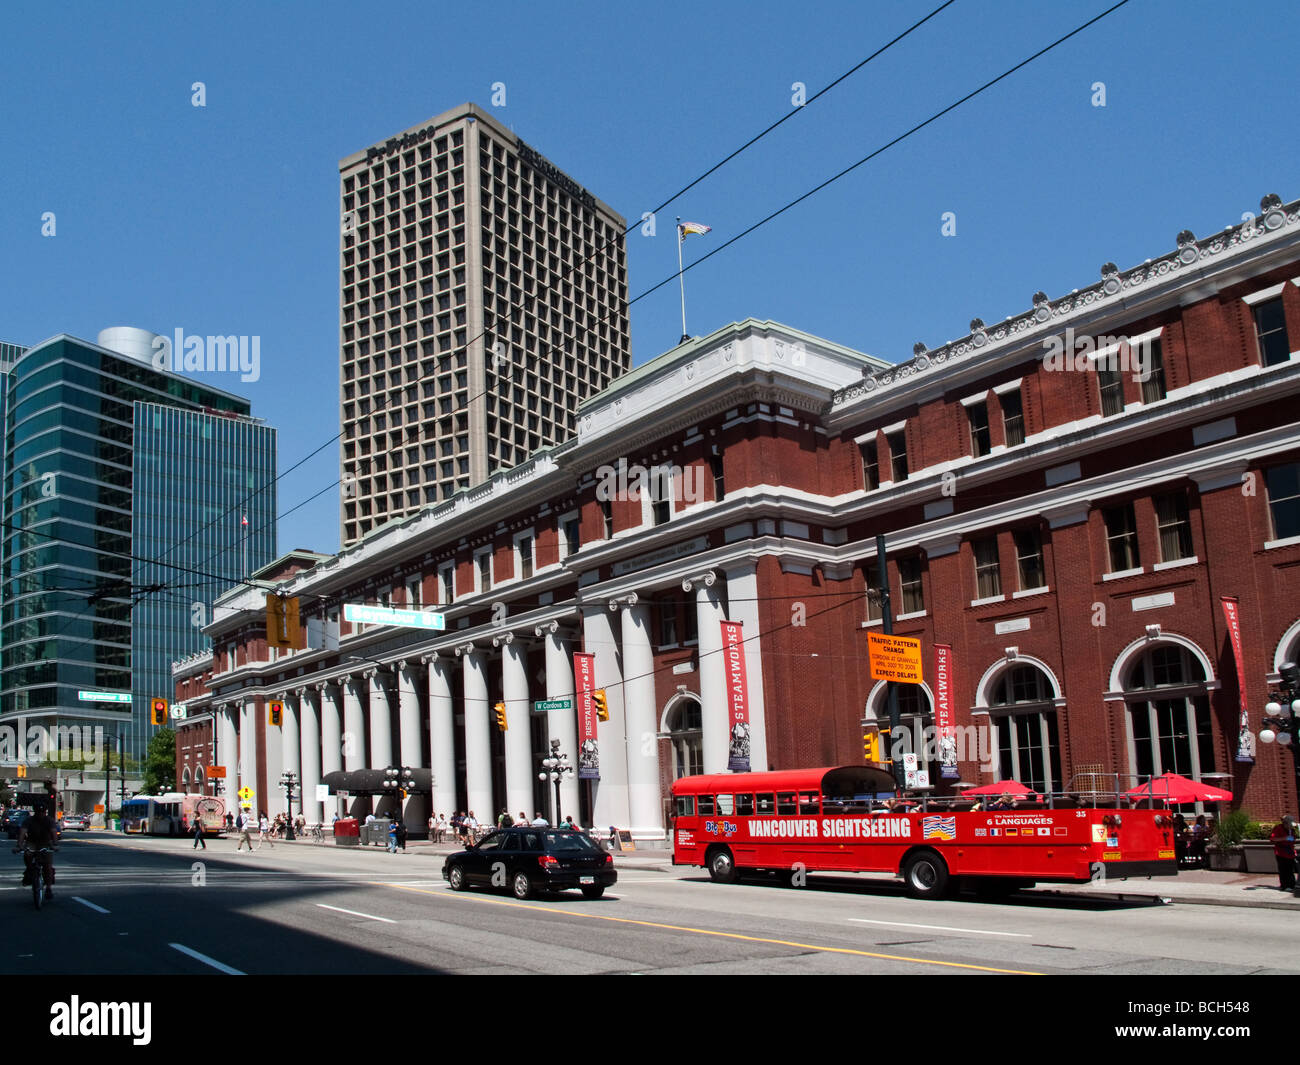 Pacific central station Vancouver sightseeing bus downtown sky train terminal Vancouver City Canada North America Stock Photo